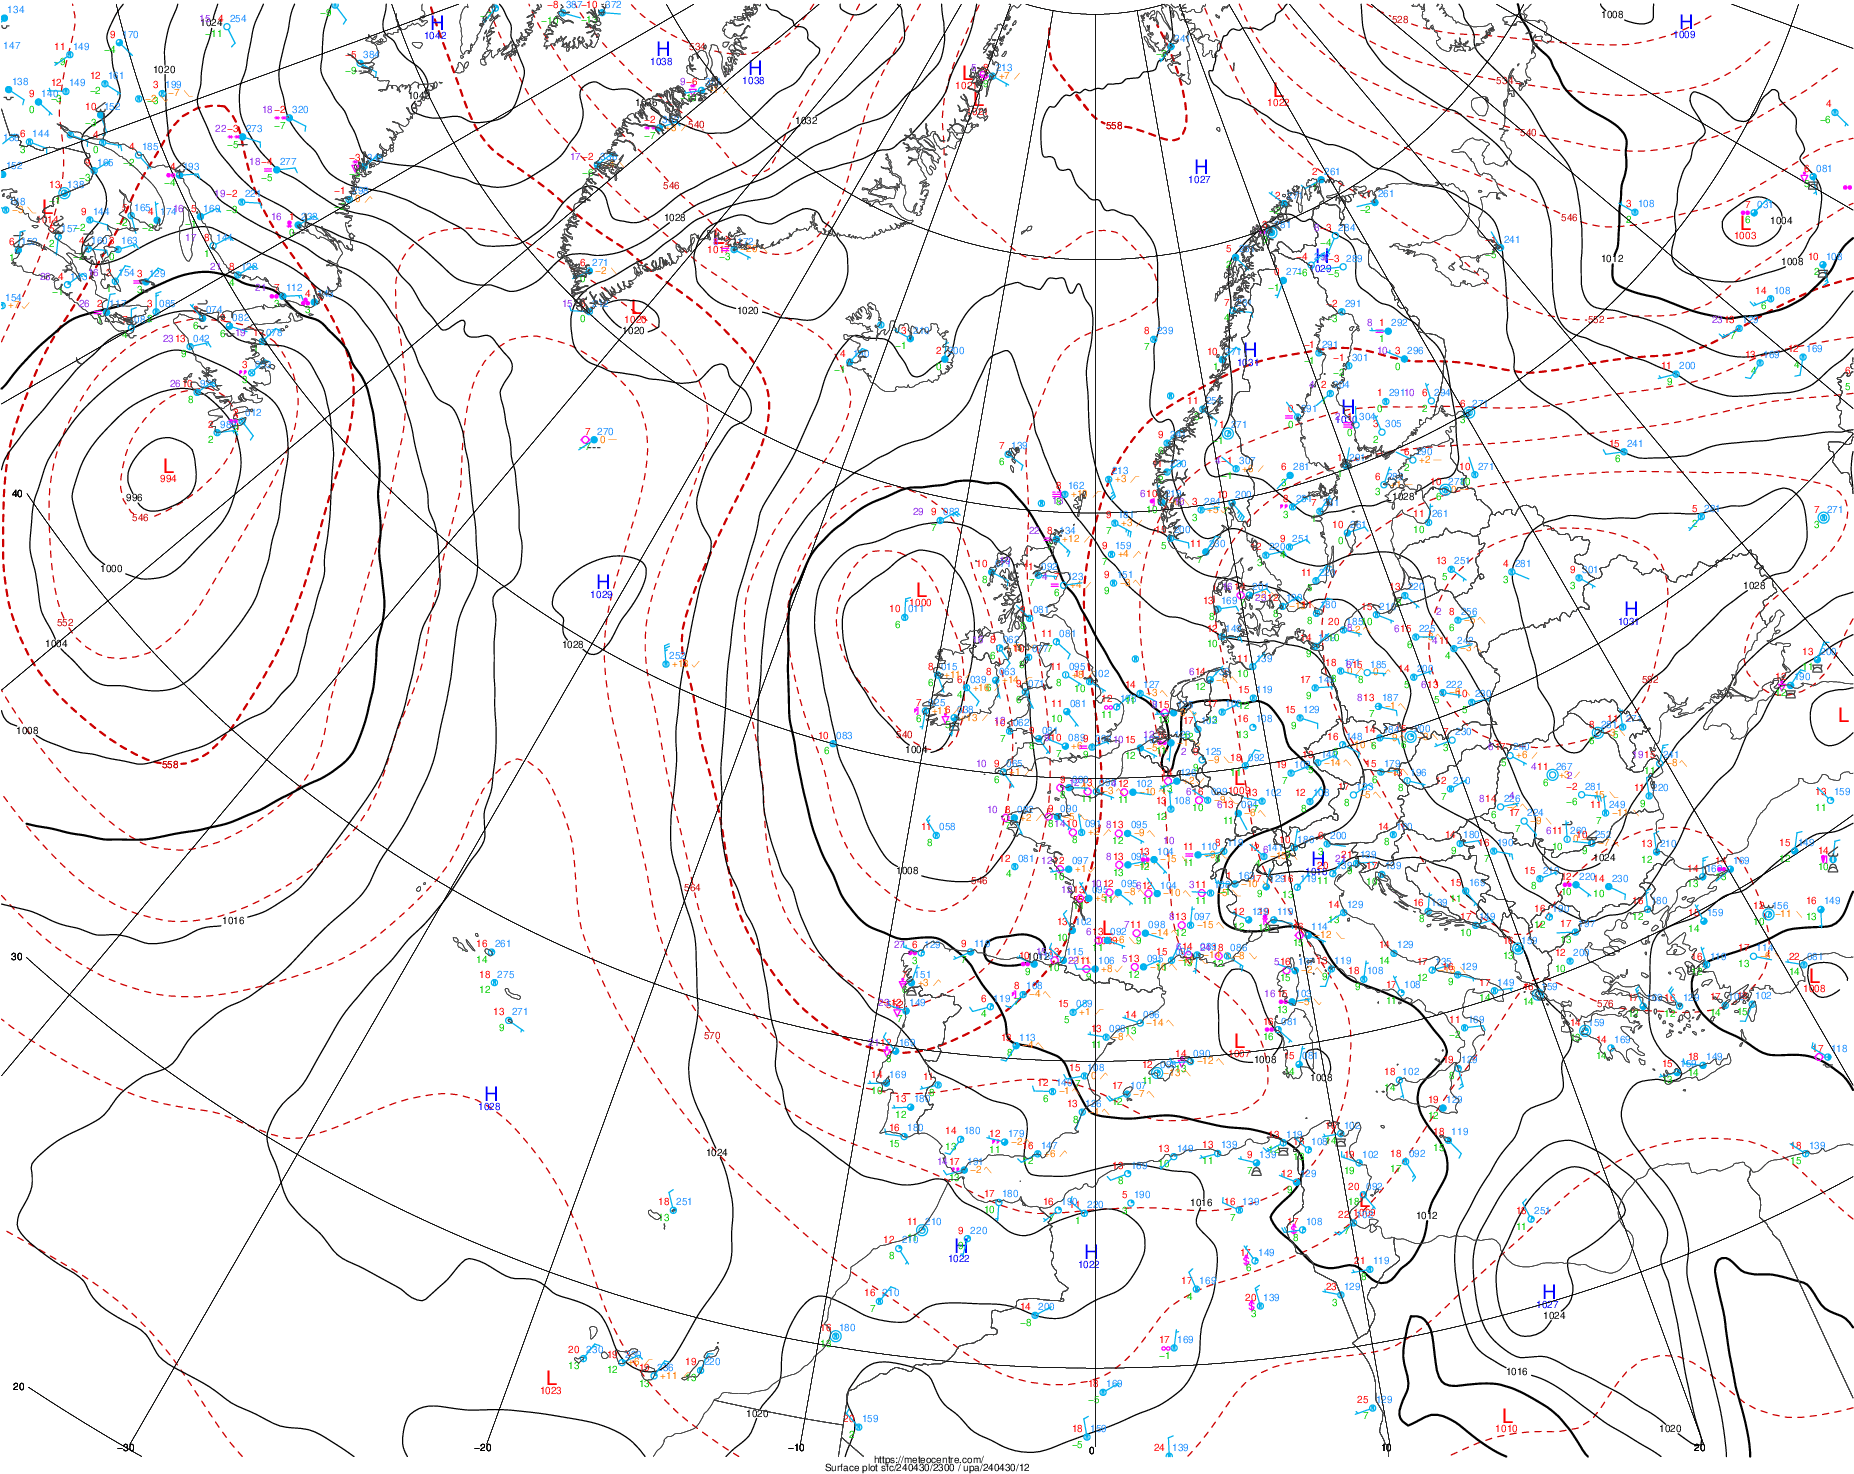 Latest weather chart of surface pressure over North Atlantic and Europe